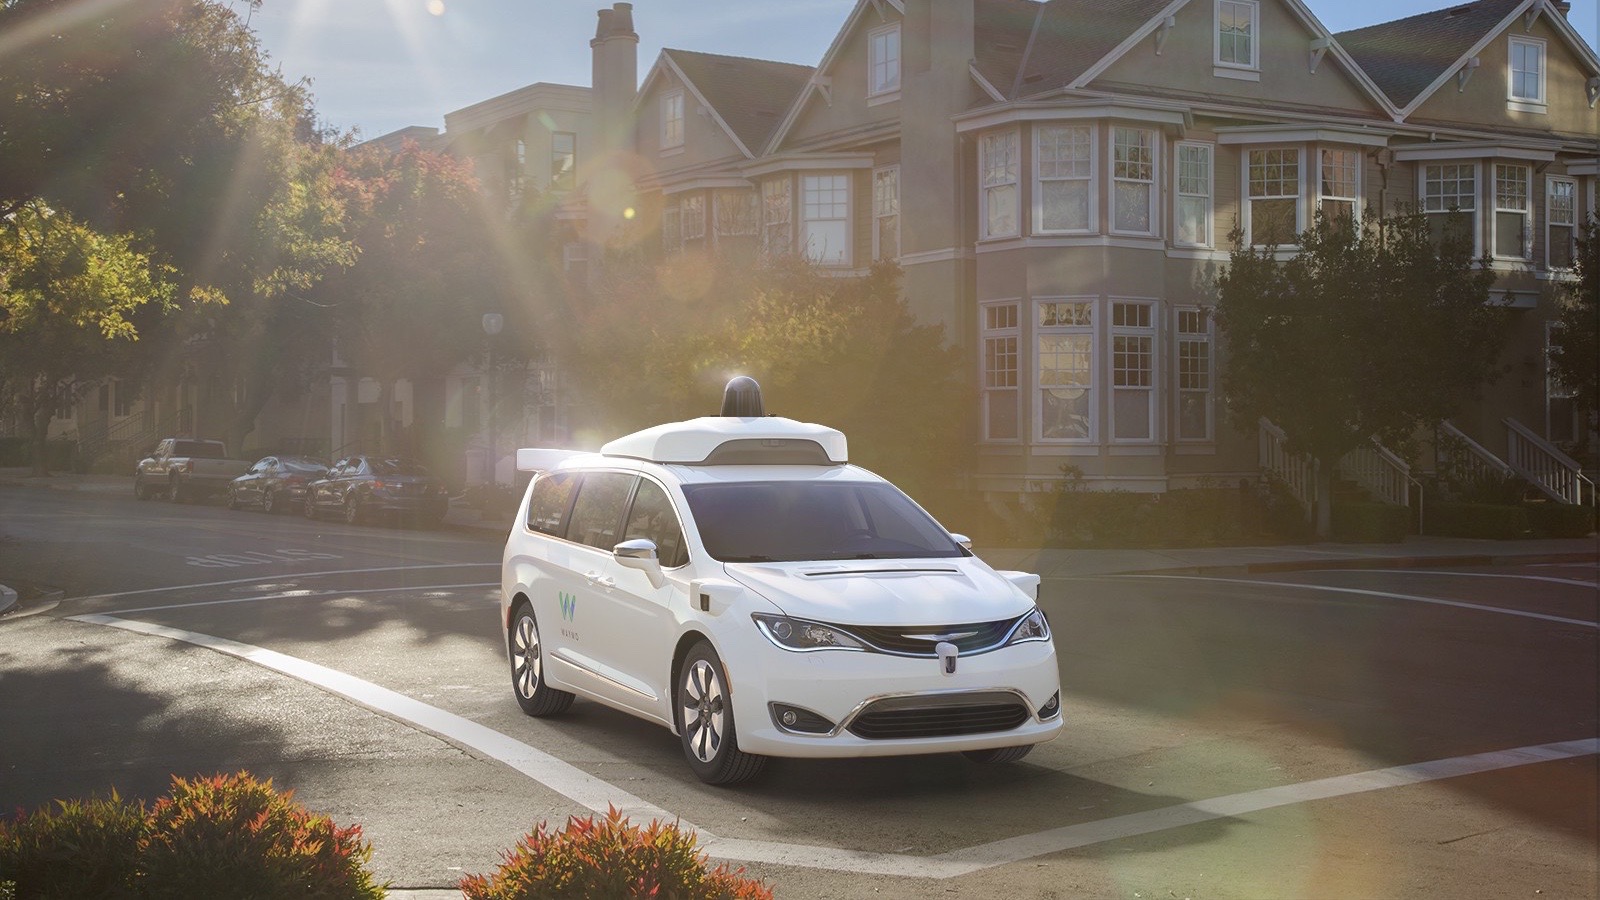 Waymo's fully autonomous cars are about to hit public streets in